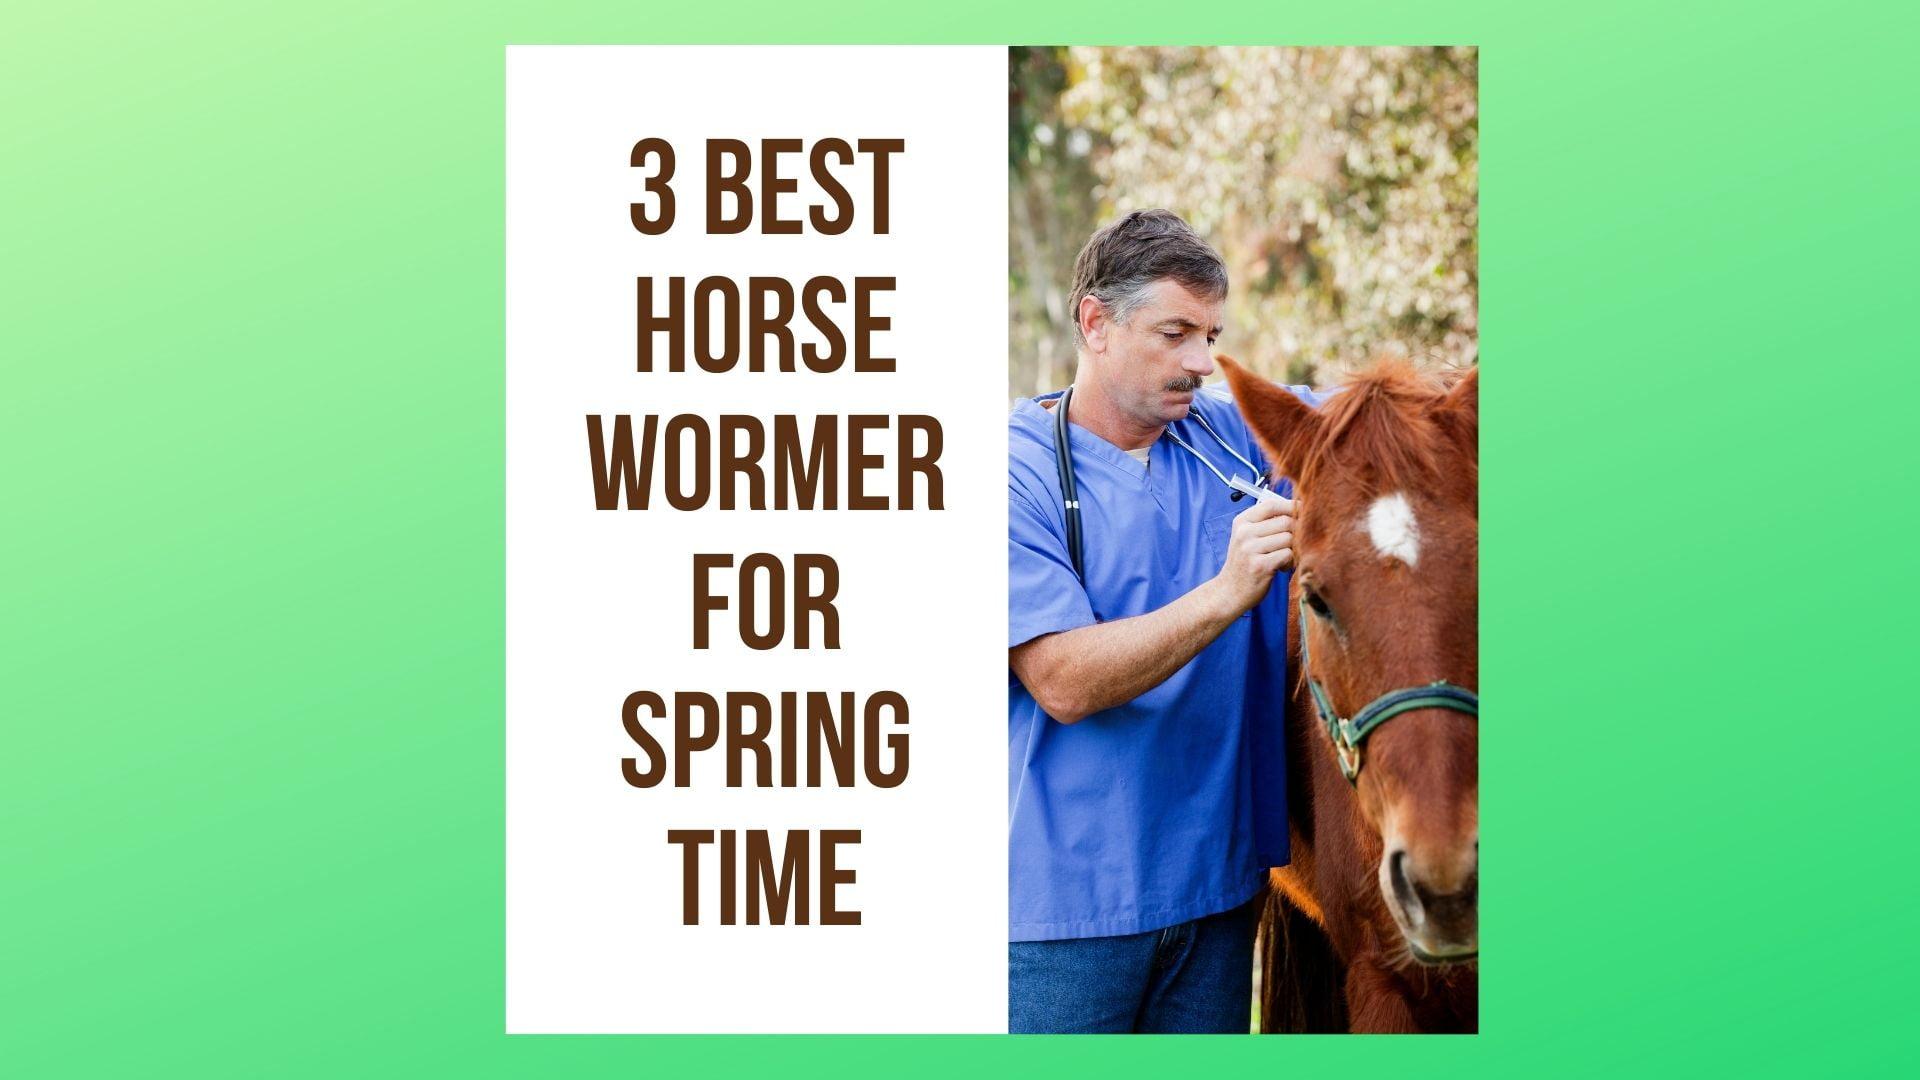 3 Best Horse Wormer For Spring Time